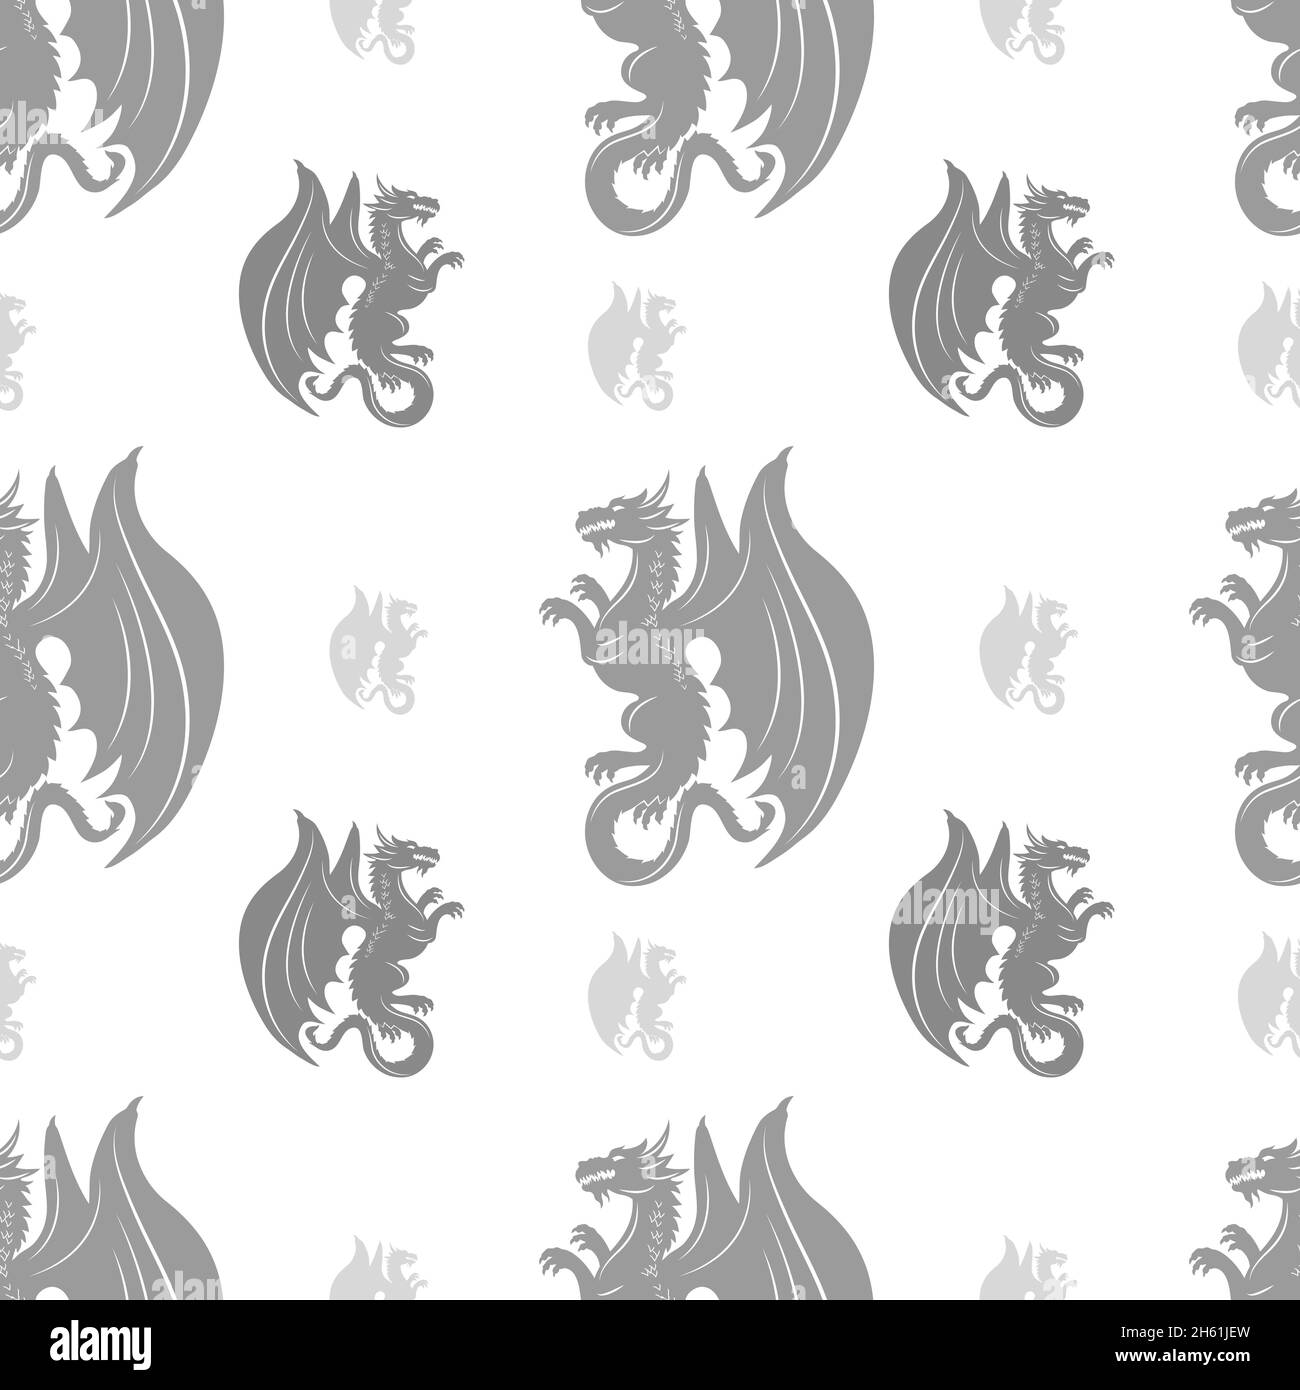 Dragon silhouettes seamless pattern with wings. Medieval dragon. Stock Vector